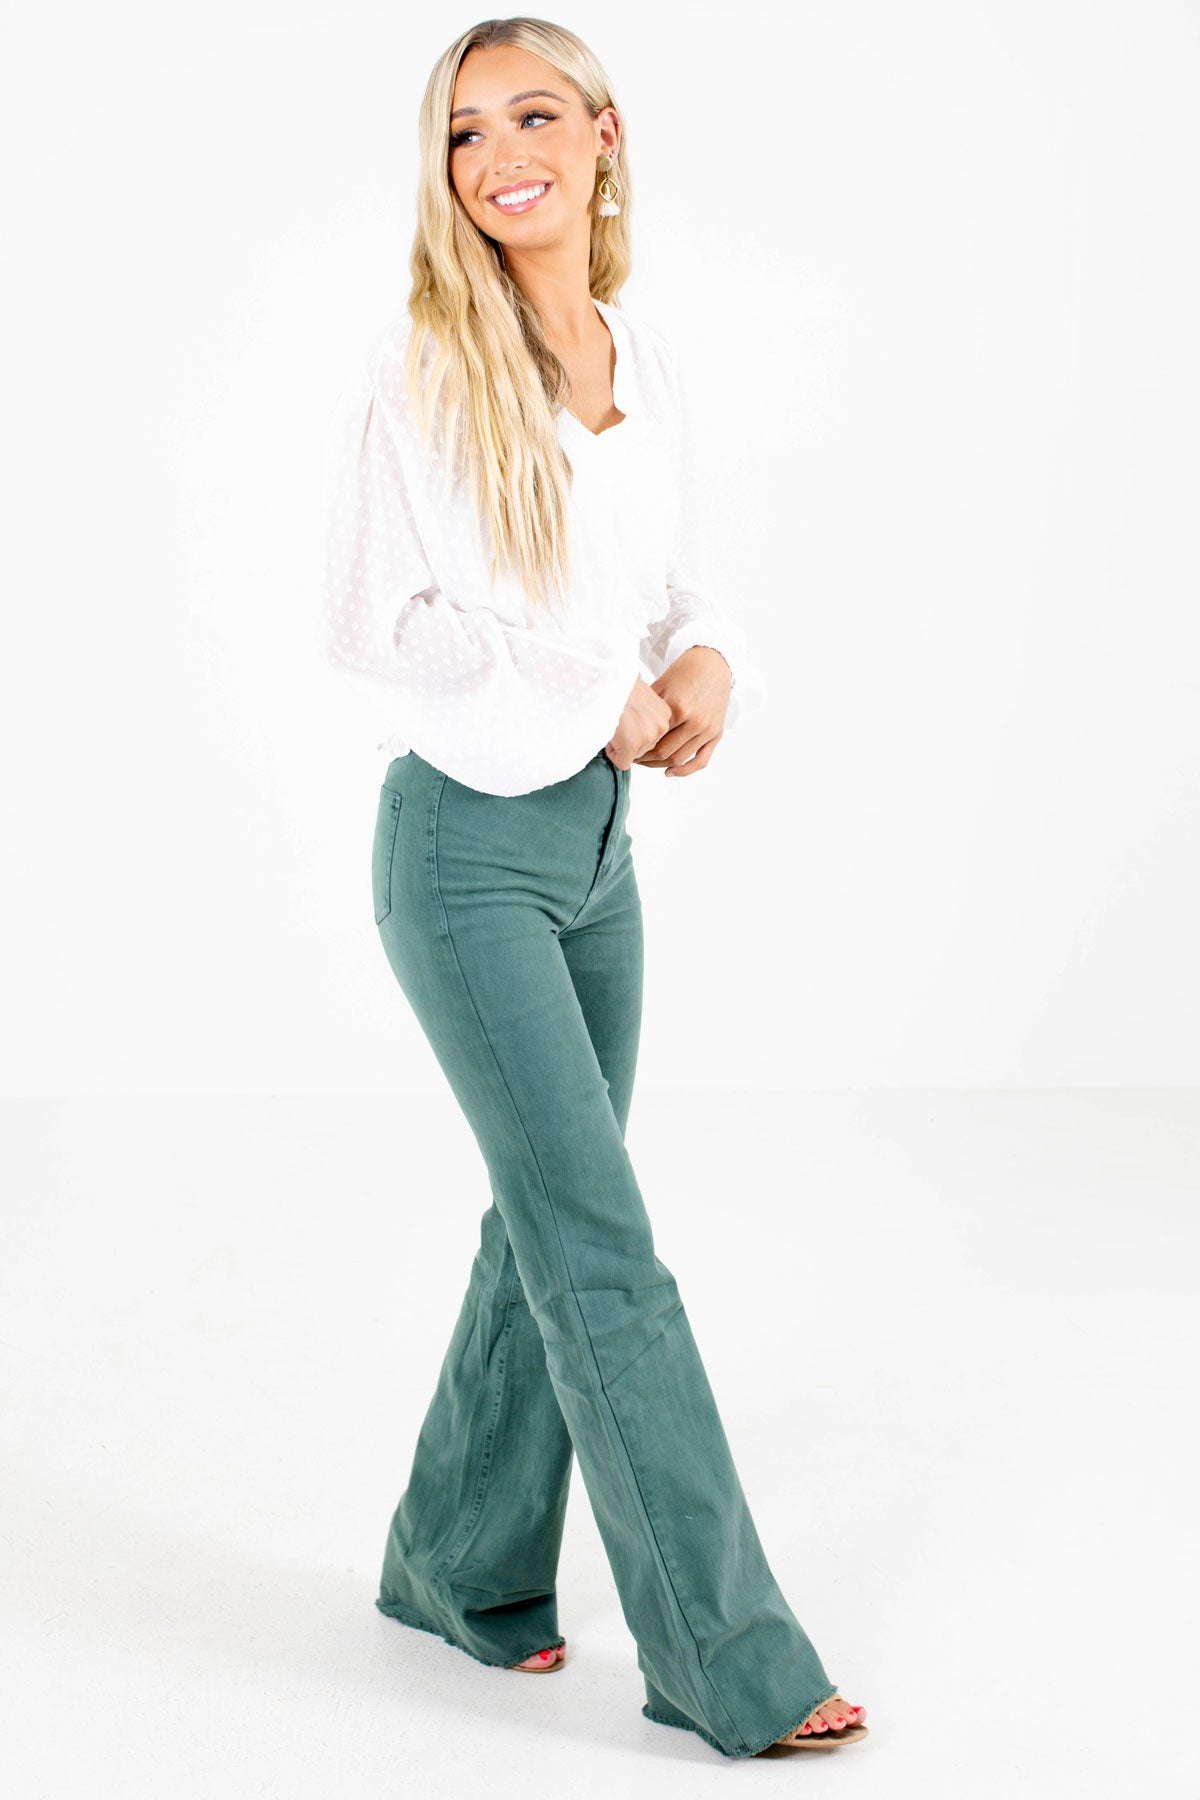 Pine Green Cute and Comfortable Boutique Jeans for Women